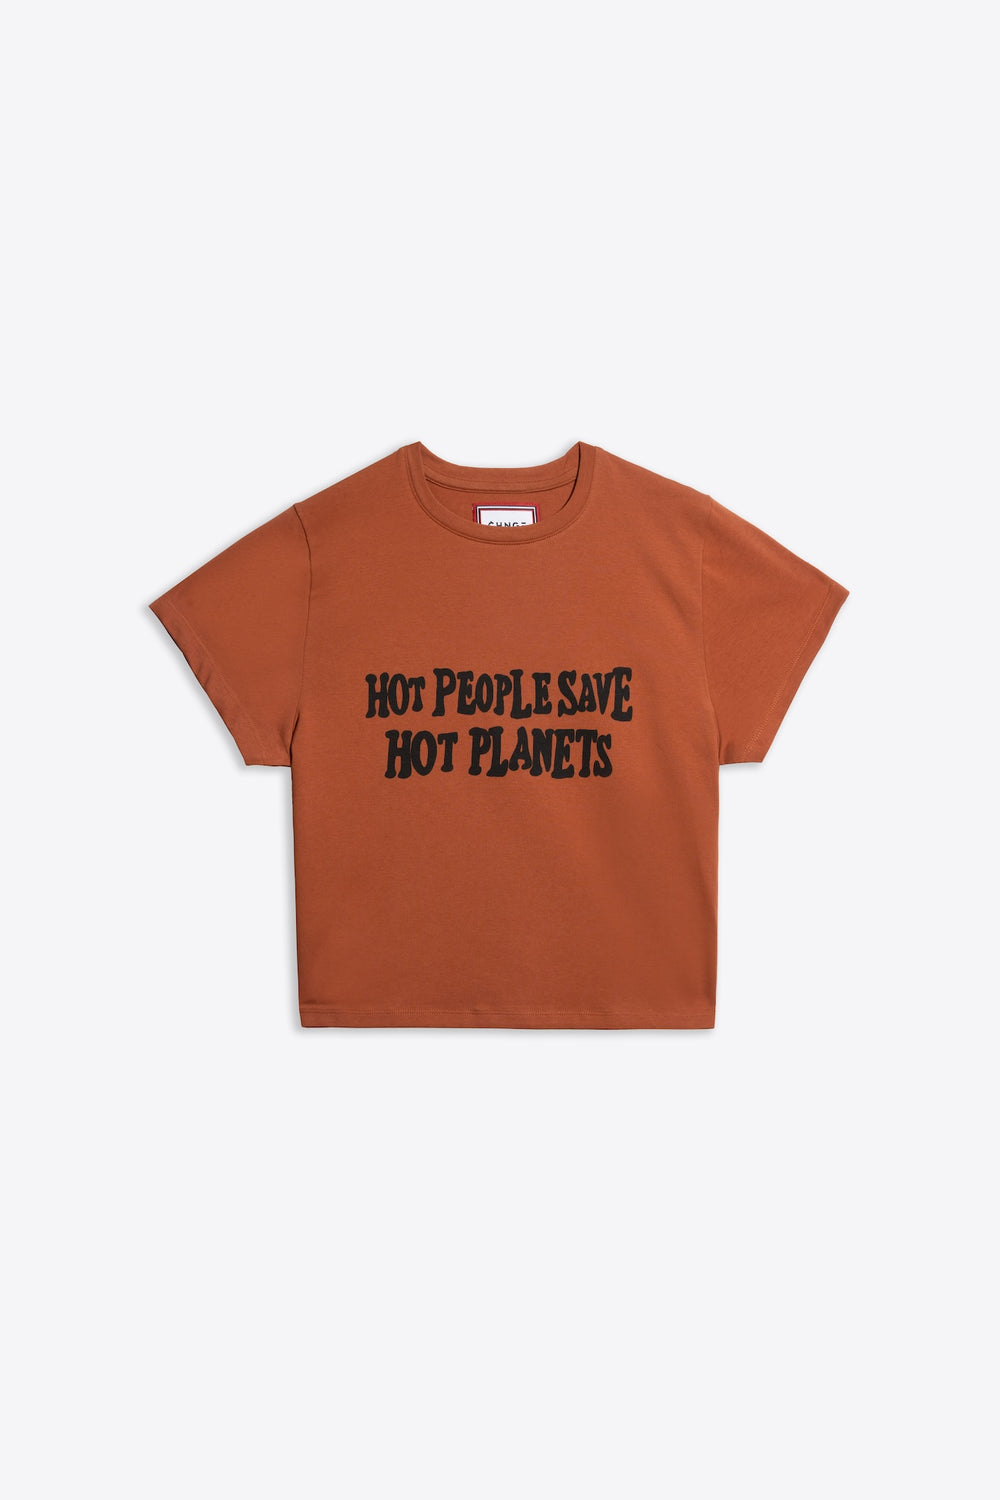 Hot People Save Hot Planets S/S Mini Stretch Jersey Tee (Clay)